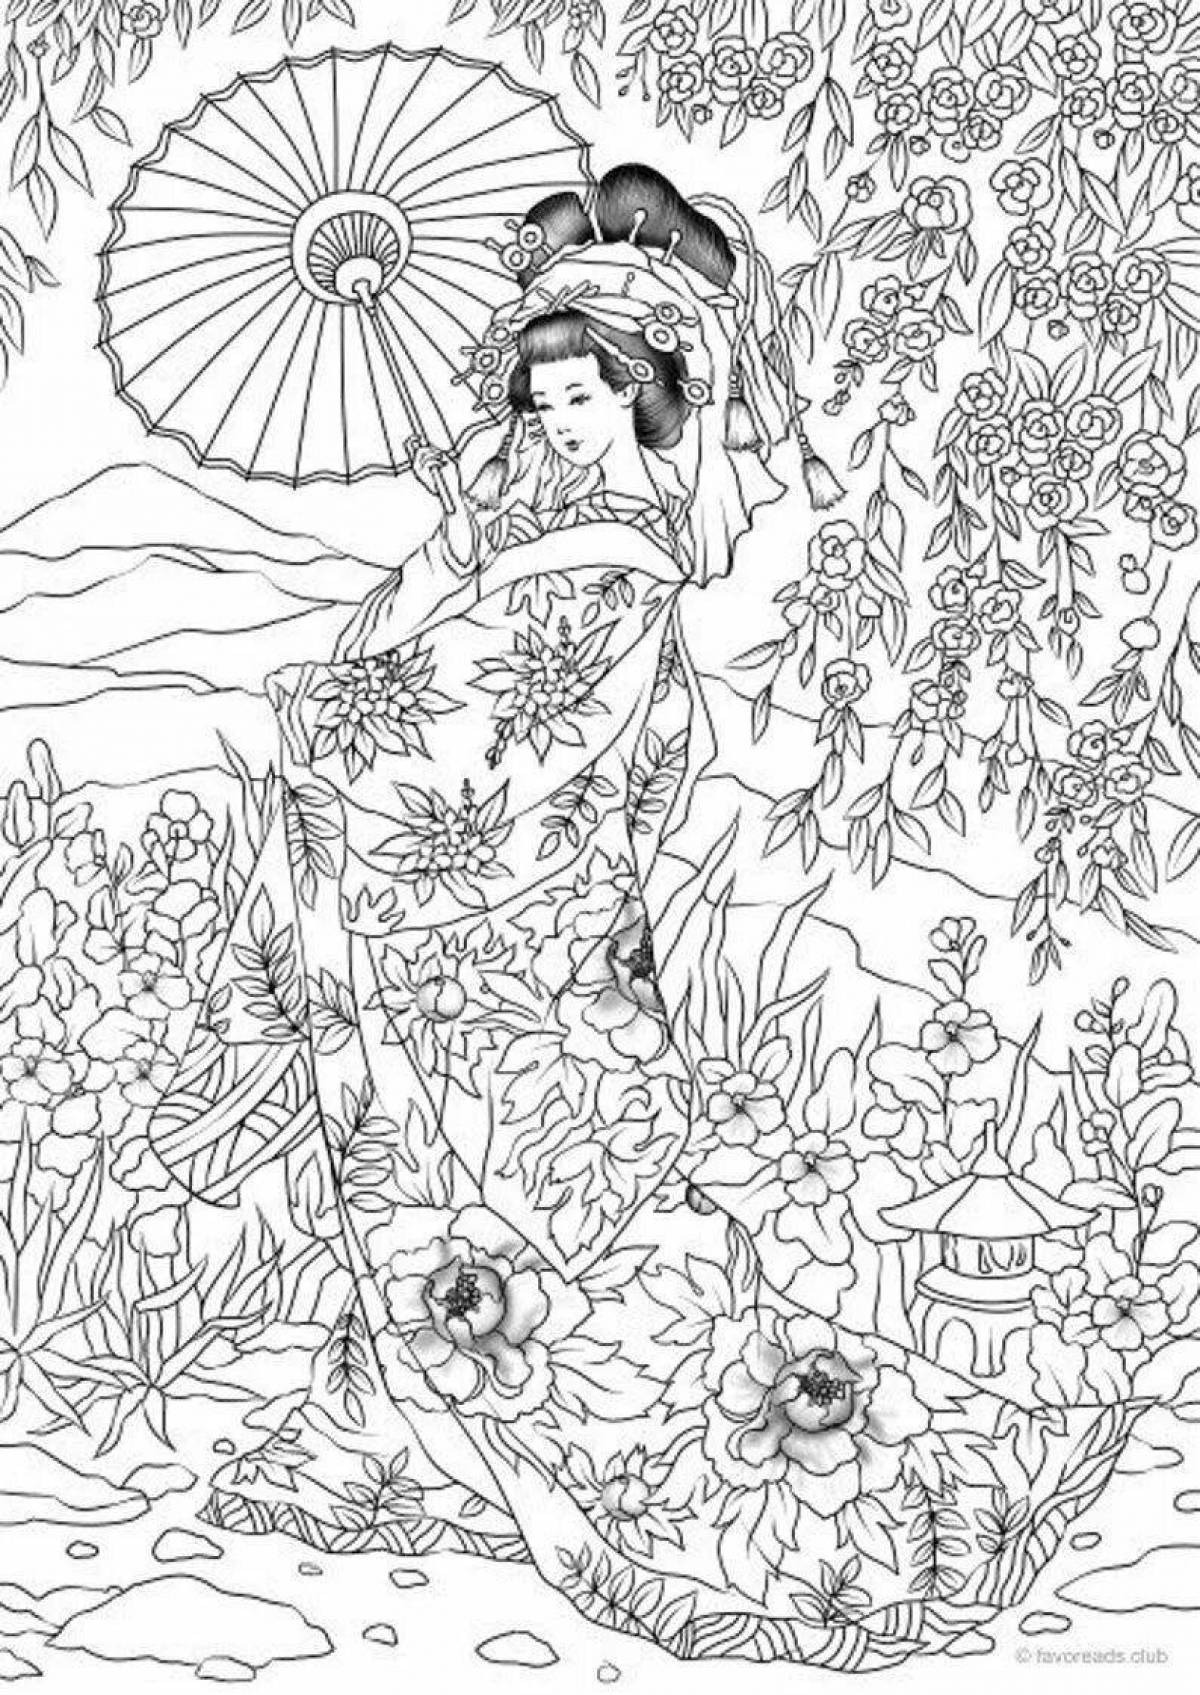 Colorful coloring page with Japanese motifs